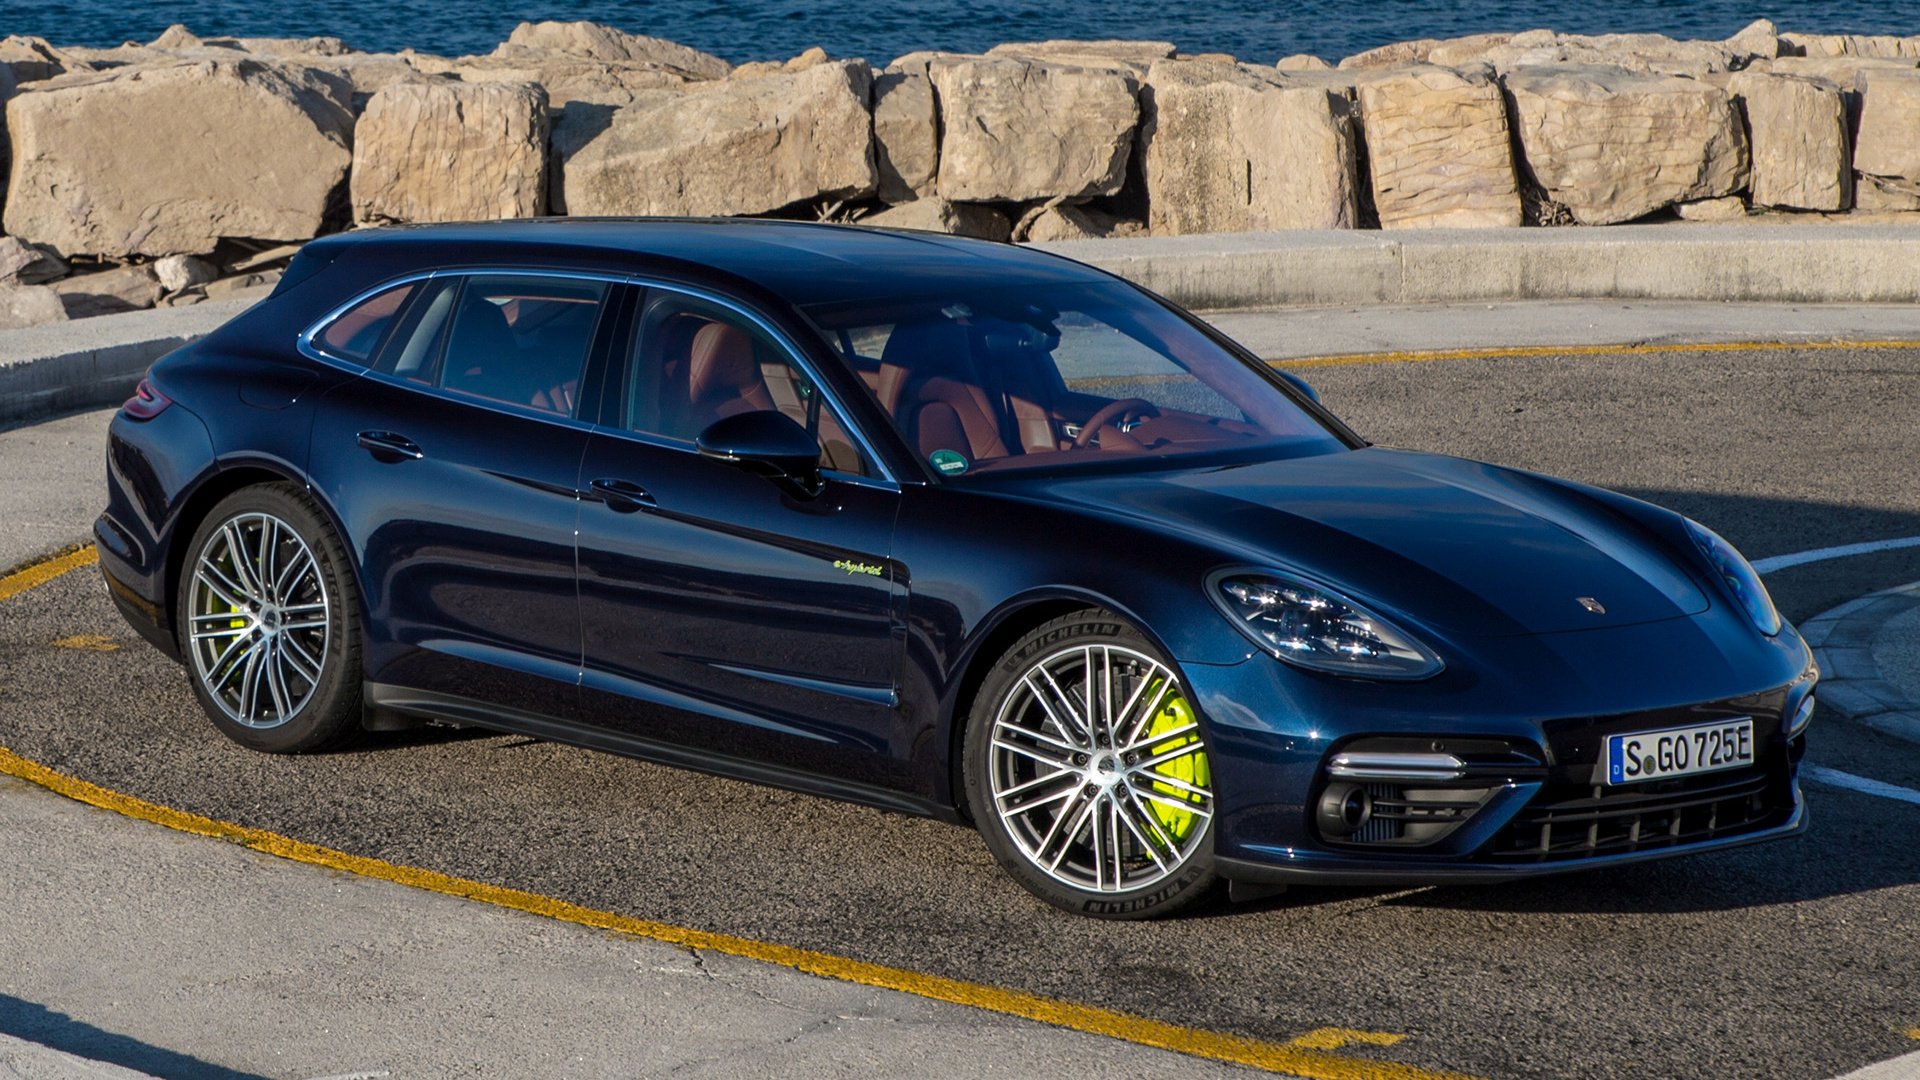 3 Porsche Panamera Turbo S E Hybrid Sport Turismo Hd Wallpapers Background Images Wallpaper Abyss